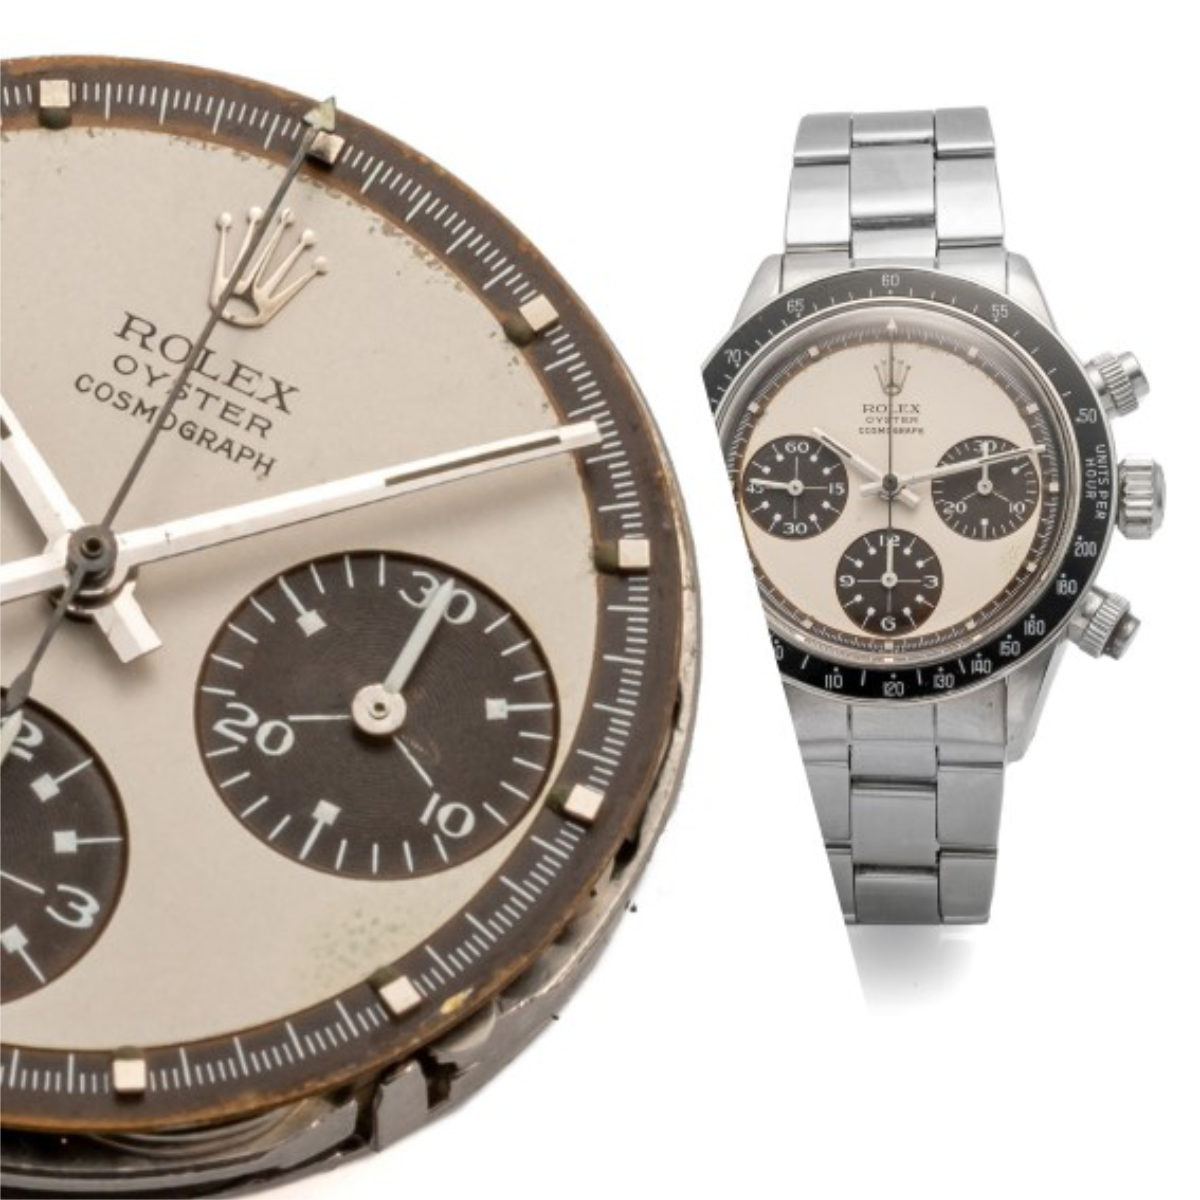 Antiquorum's Monaco Auction: A Curated Selection Of Important Modern & Vintage Timepieces & Jewelry